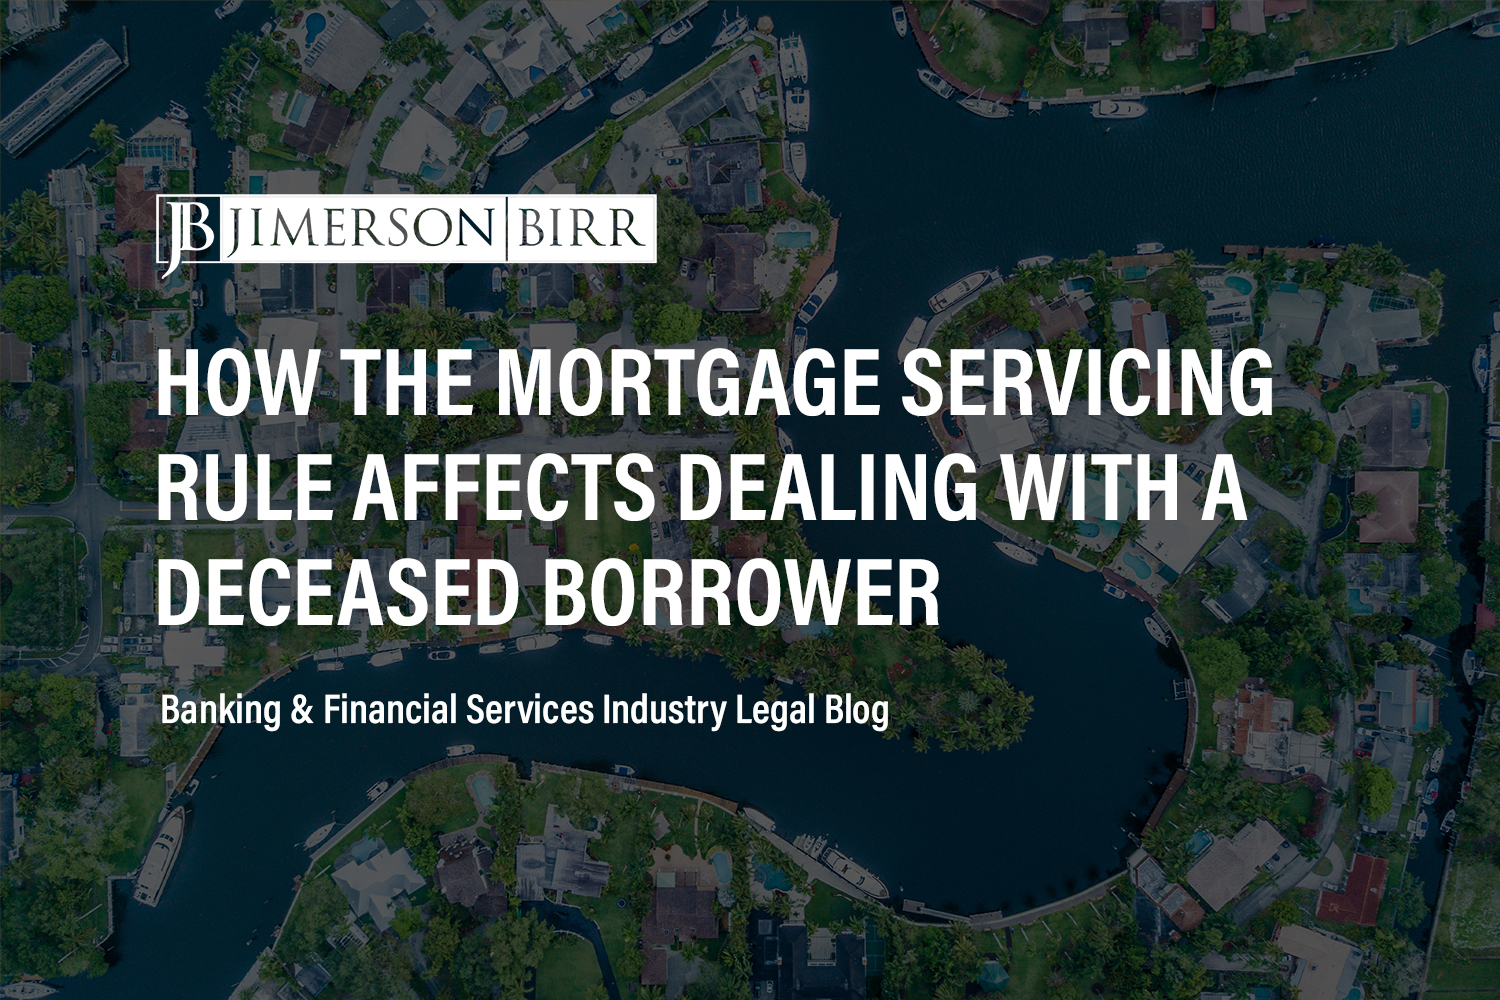 Dealing with Deceased Borrowers Since the 2016 Mortgage Servicing Rule